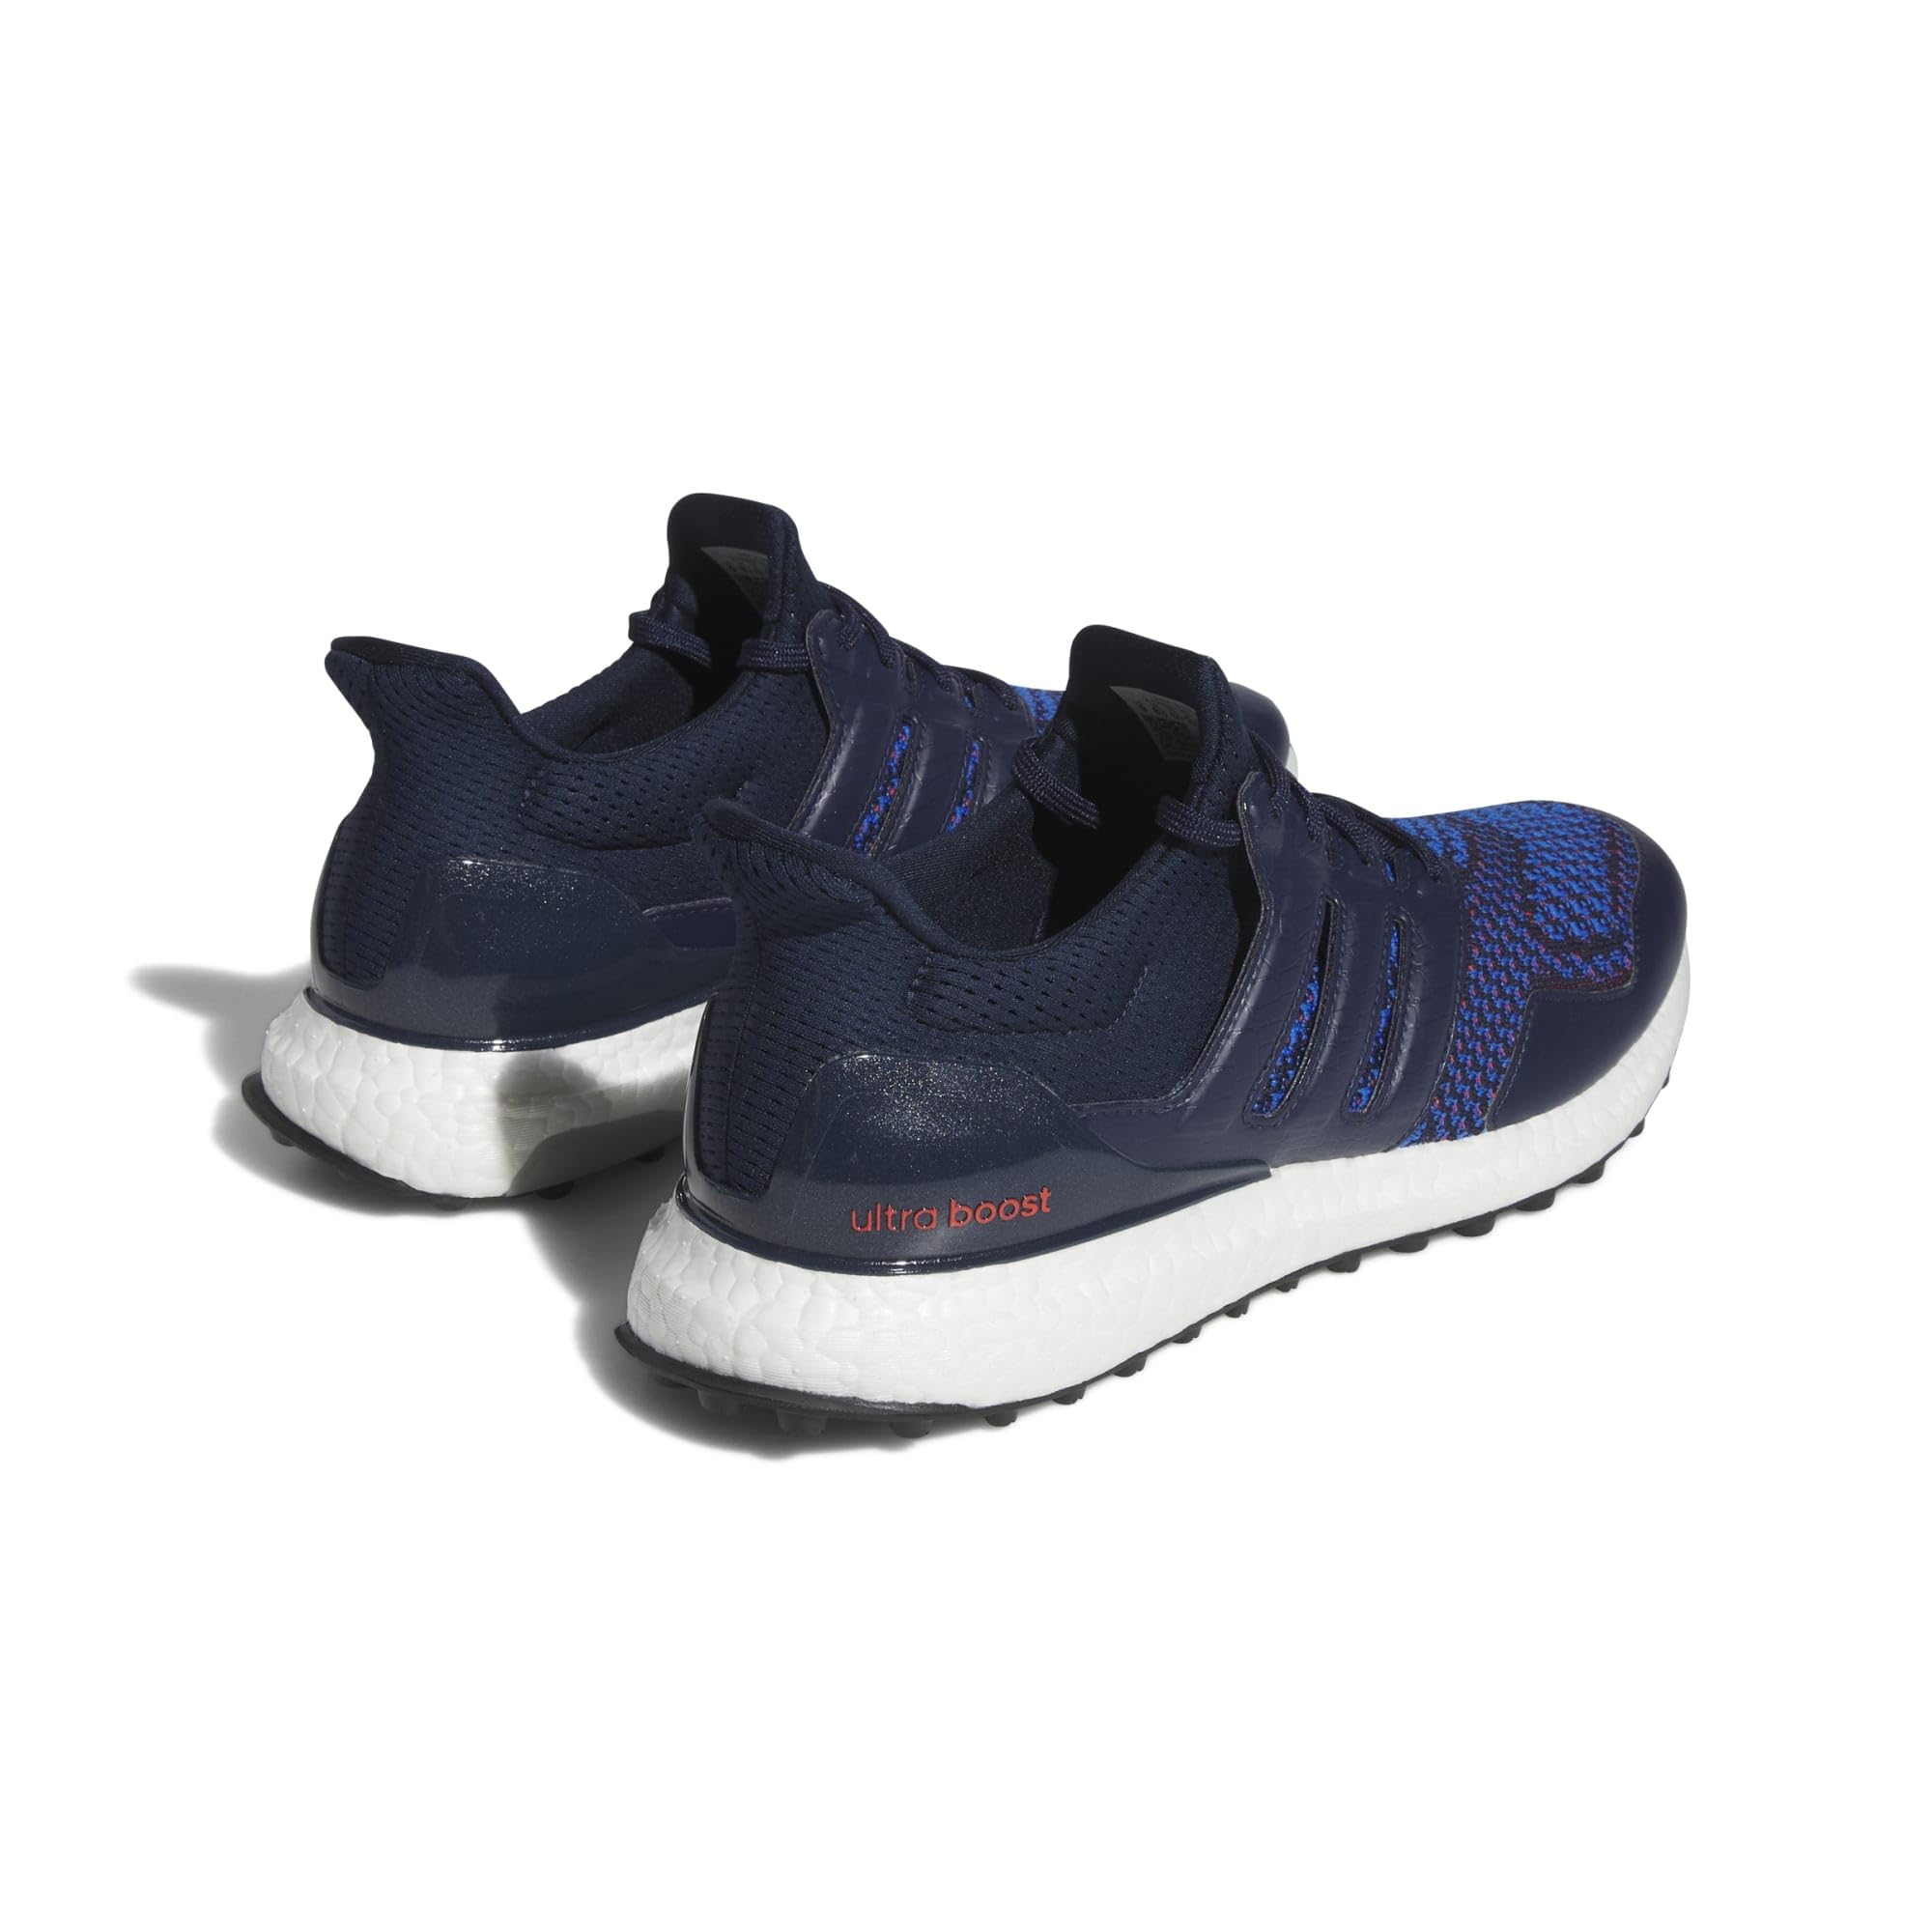 Кроссовки adidas Golf Ultraboost Golf Shoes h2 8702 golf shoes men women professional golf shoes breathable golf training sneakers outdoor golf trainers for men women